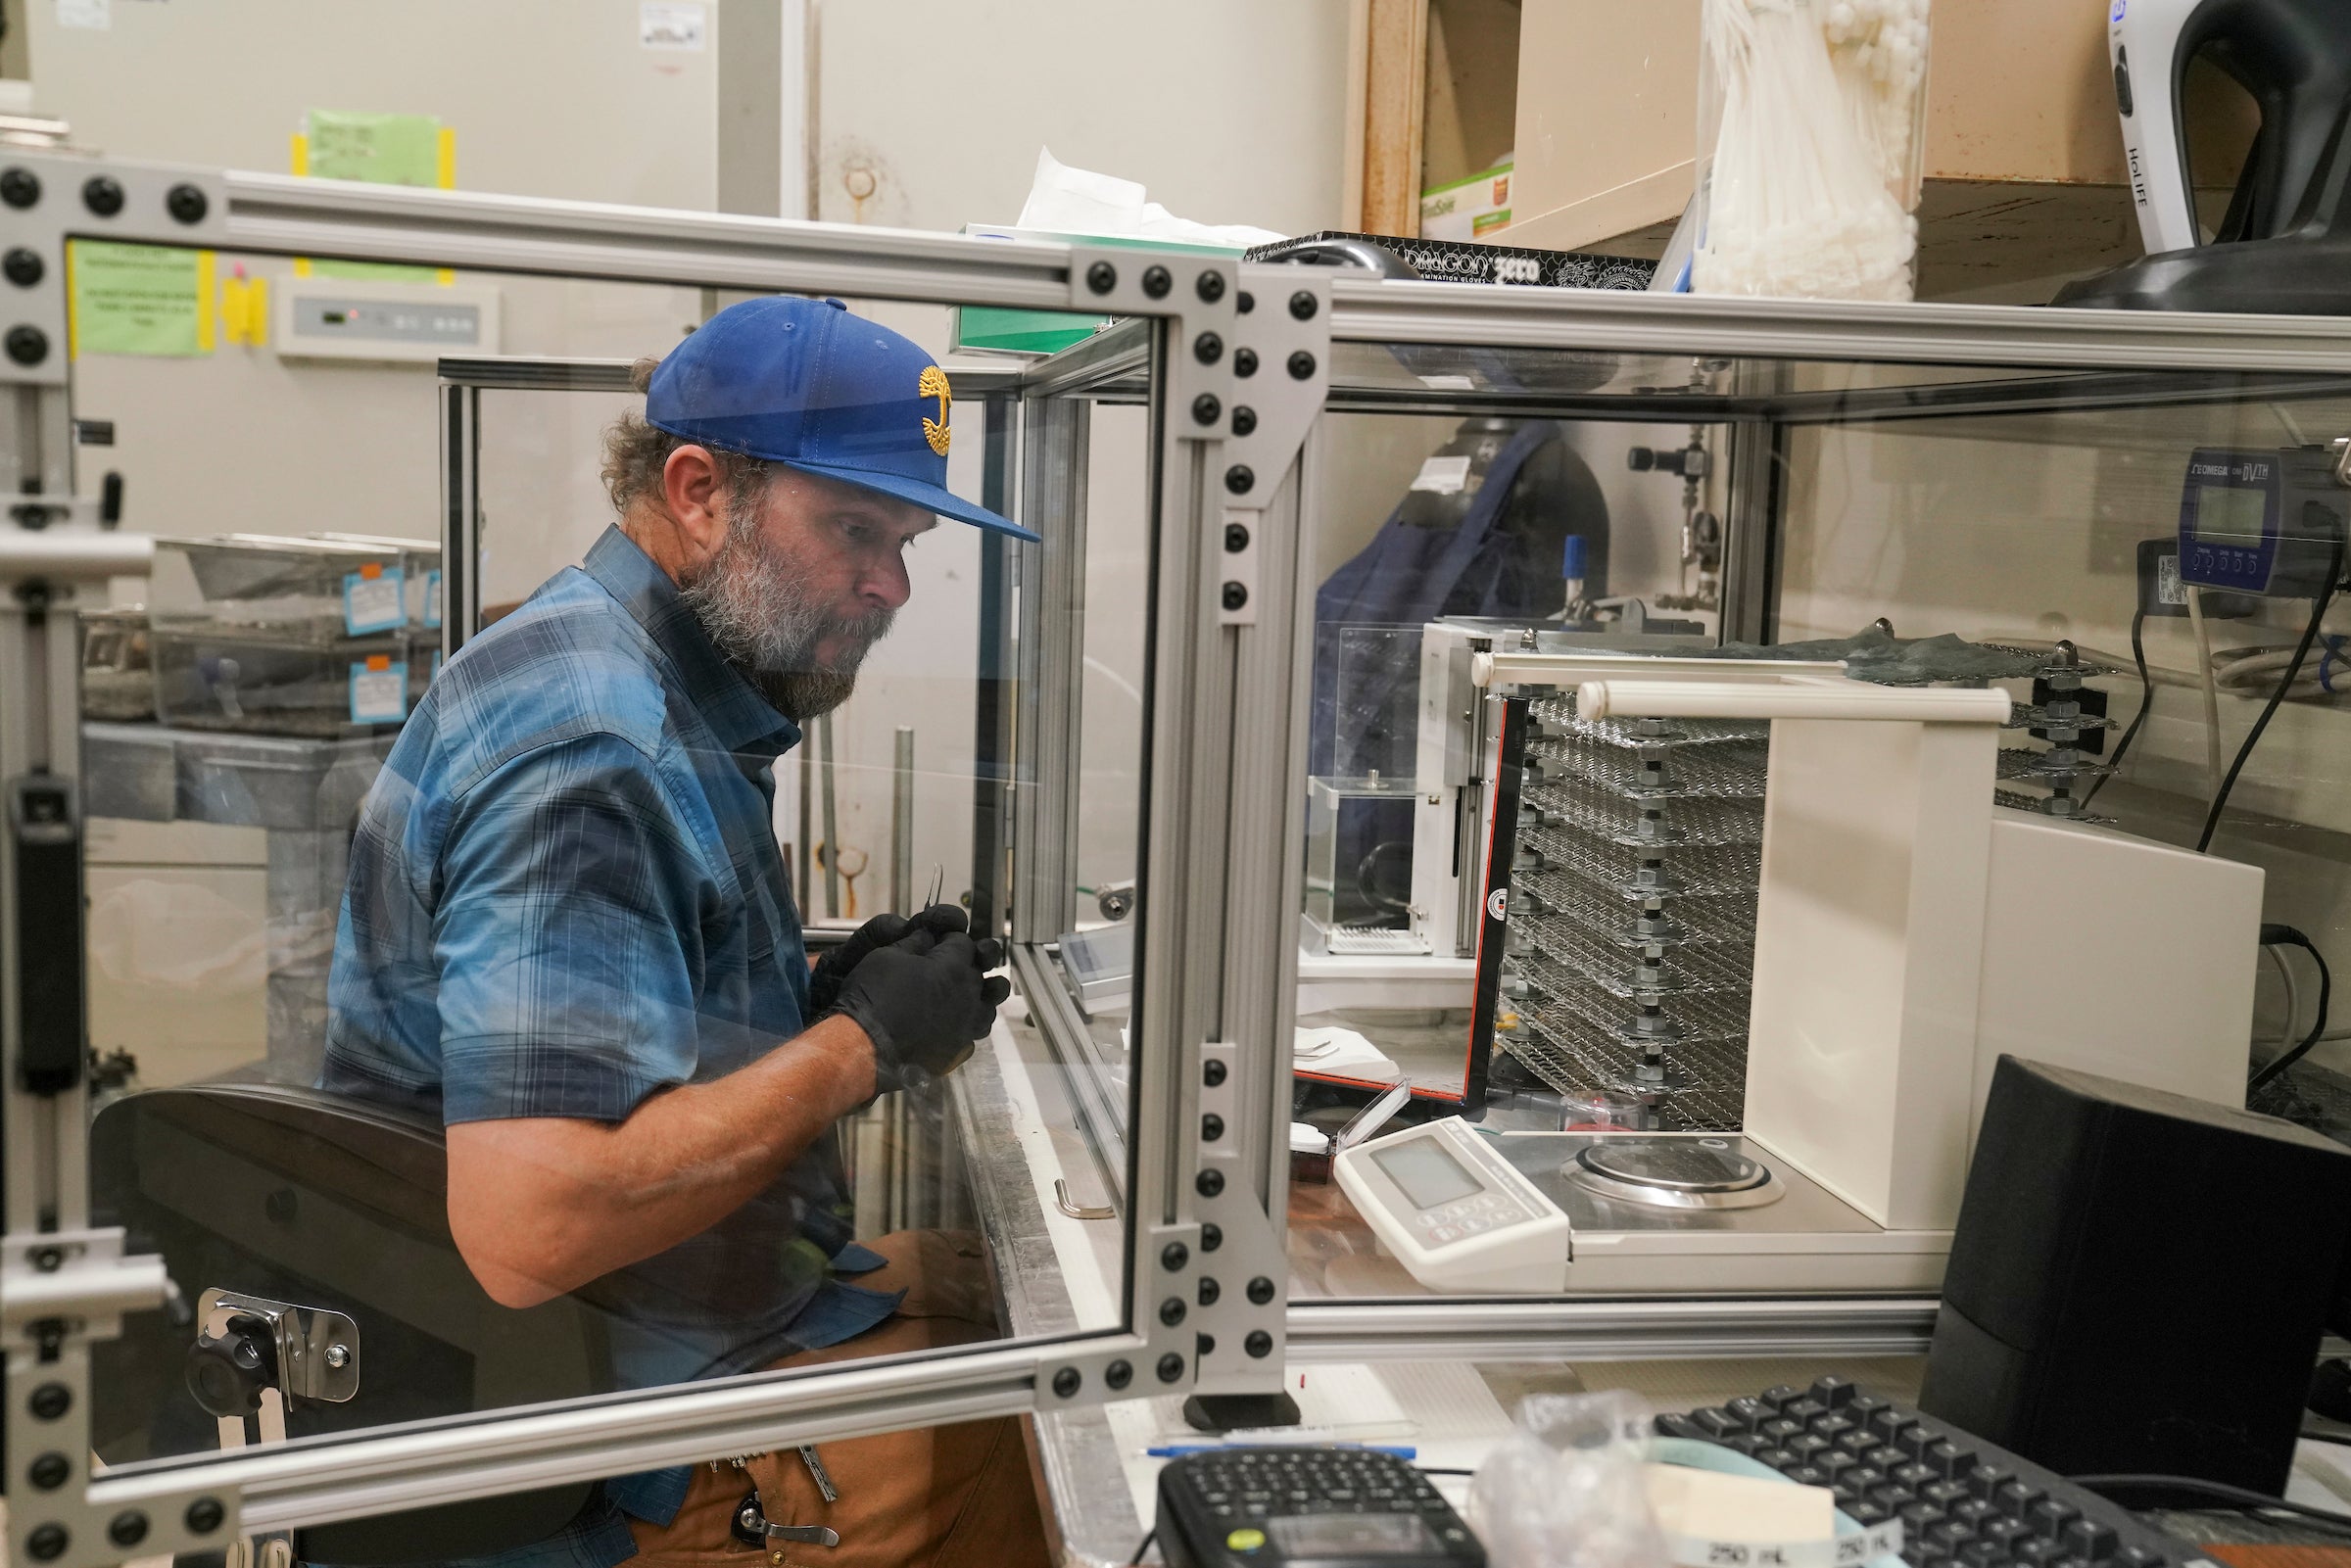 Man in blue shirt and cap seated in lab at work on airquality research